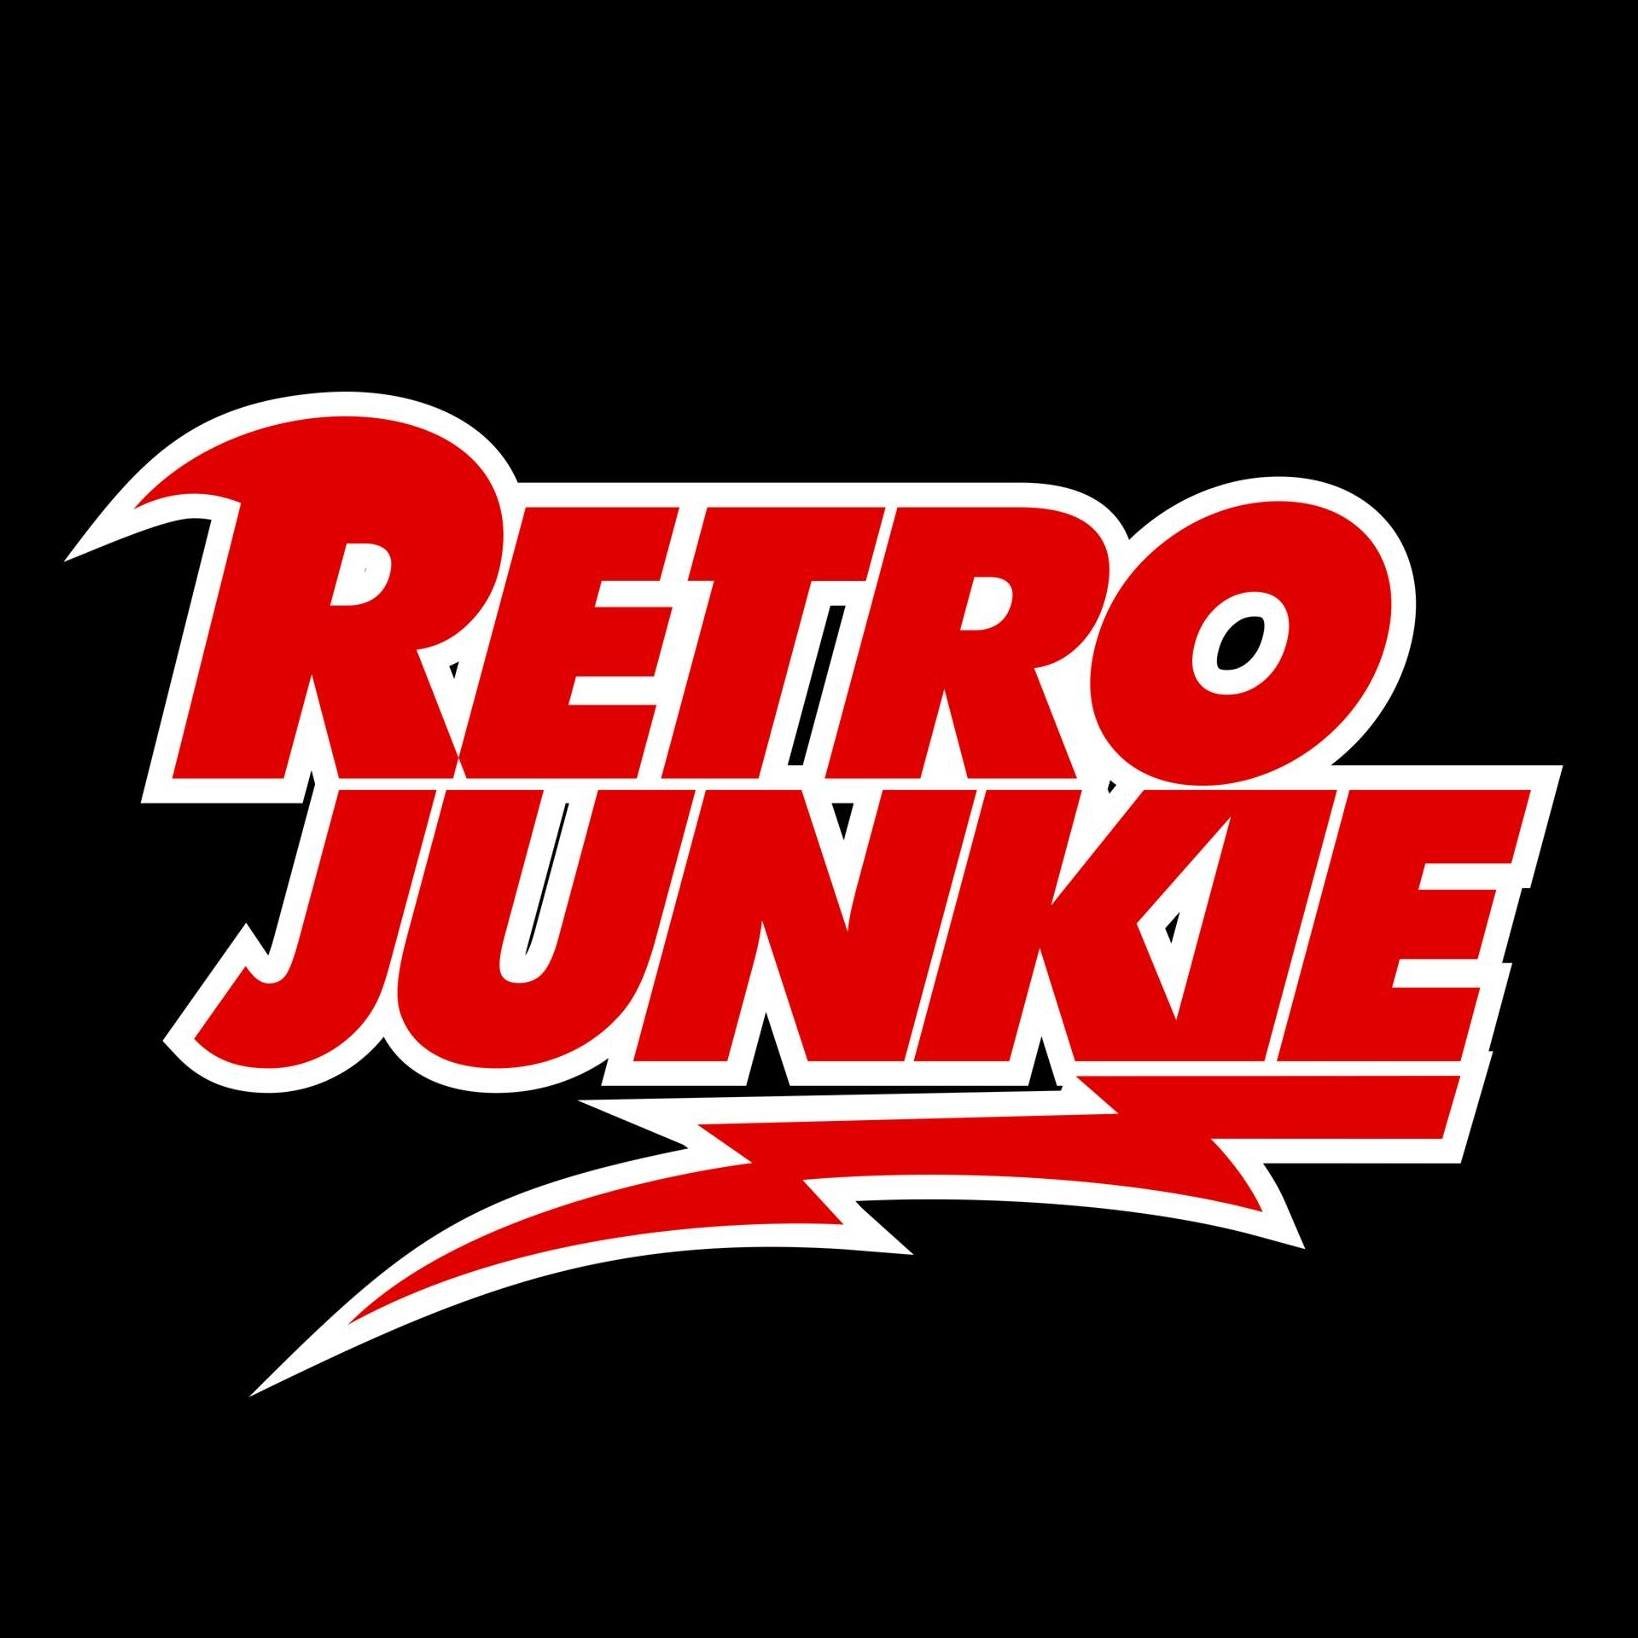 Retro Junkie is the Bay Area’s newest entertainment go-to where totally geek meets totally chic, bringing Pinball Arcade swagger back to the future!